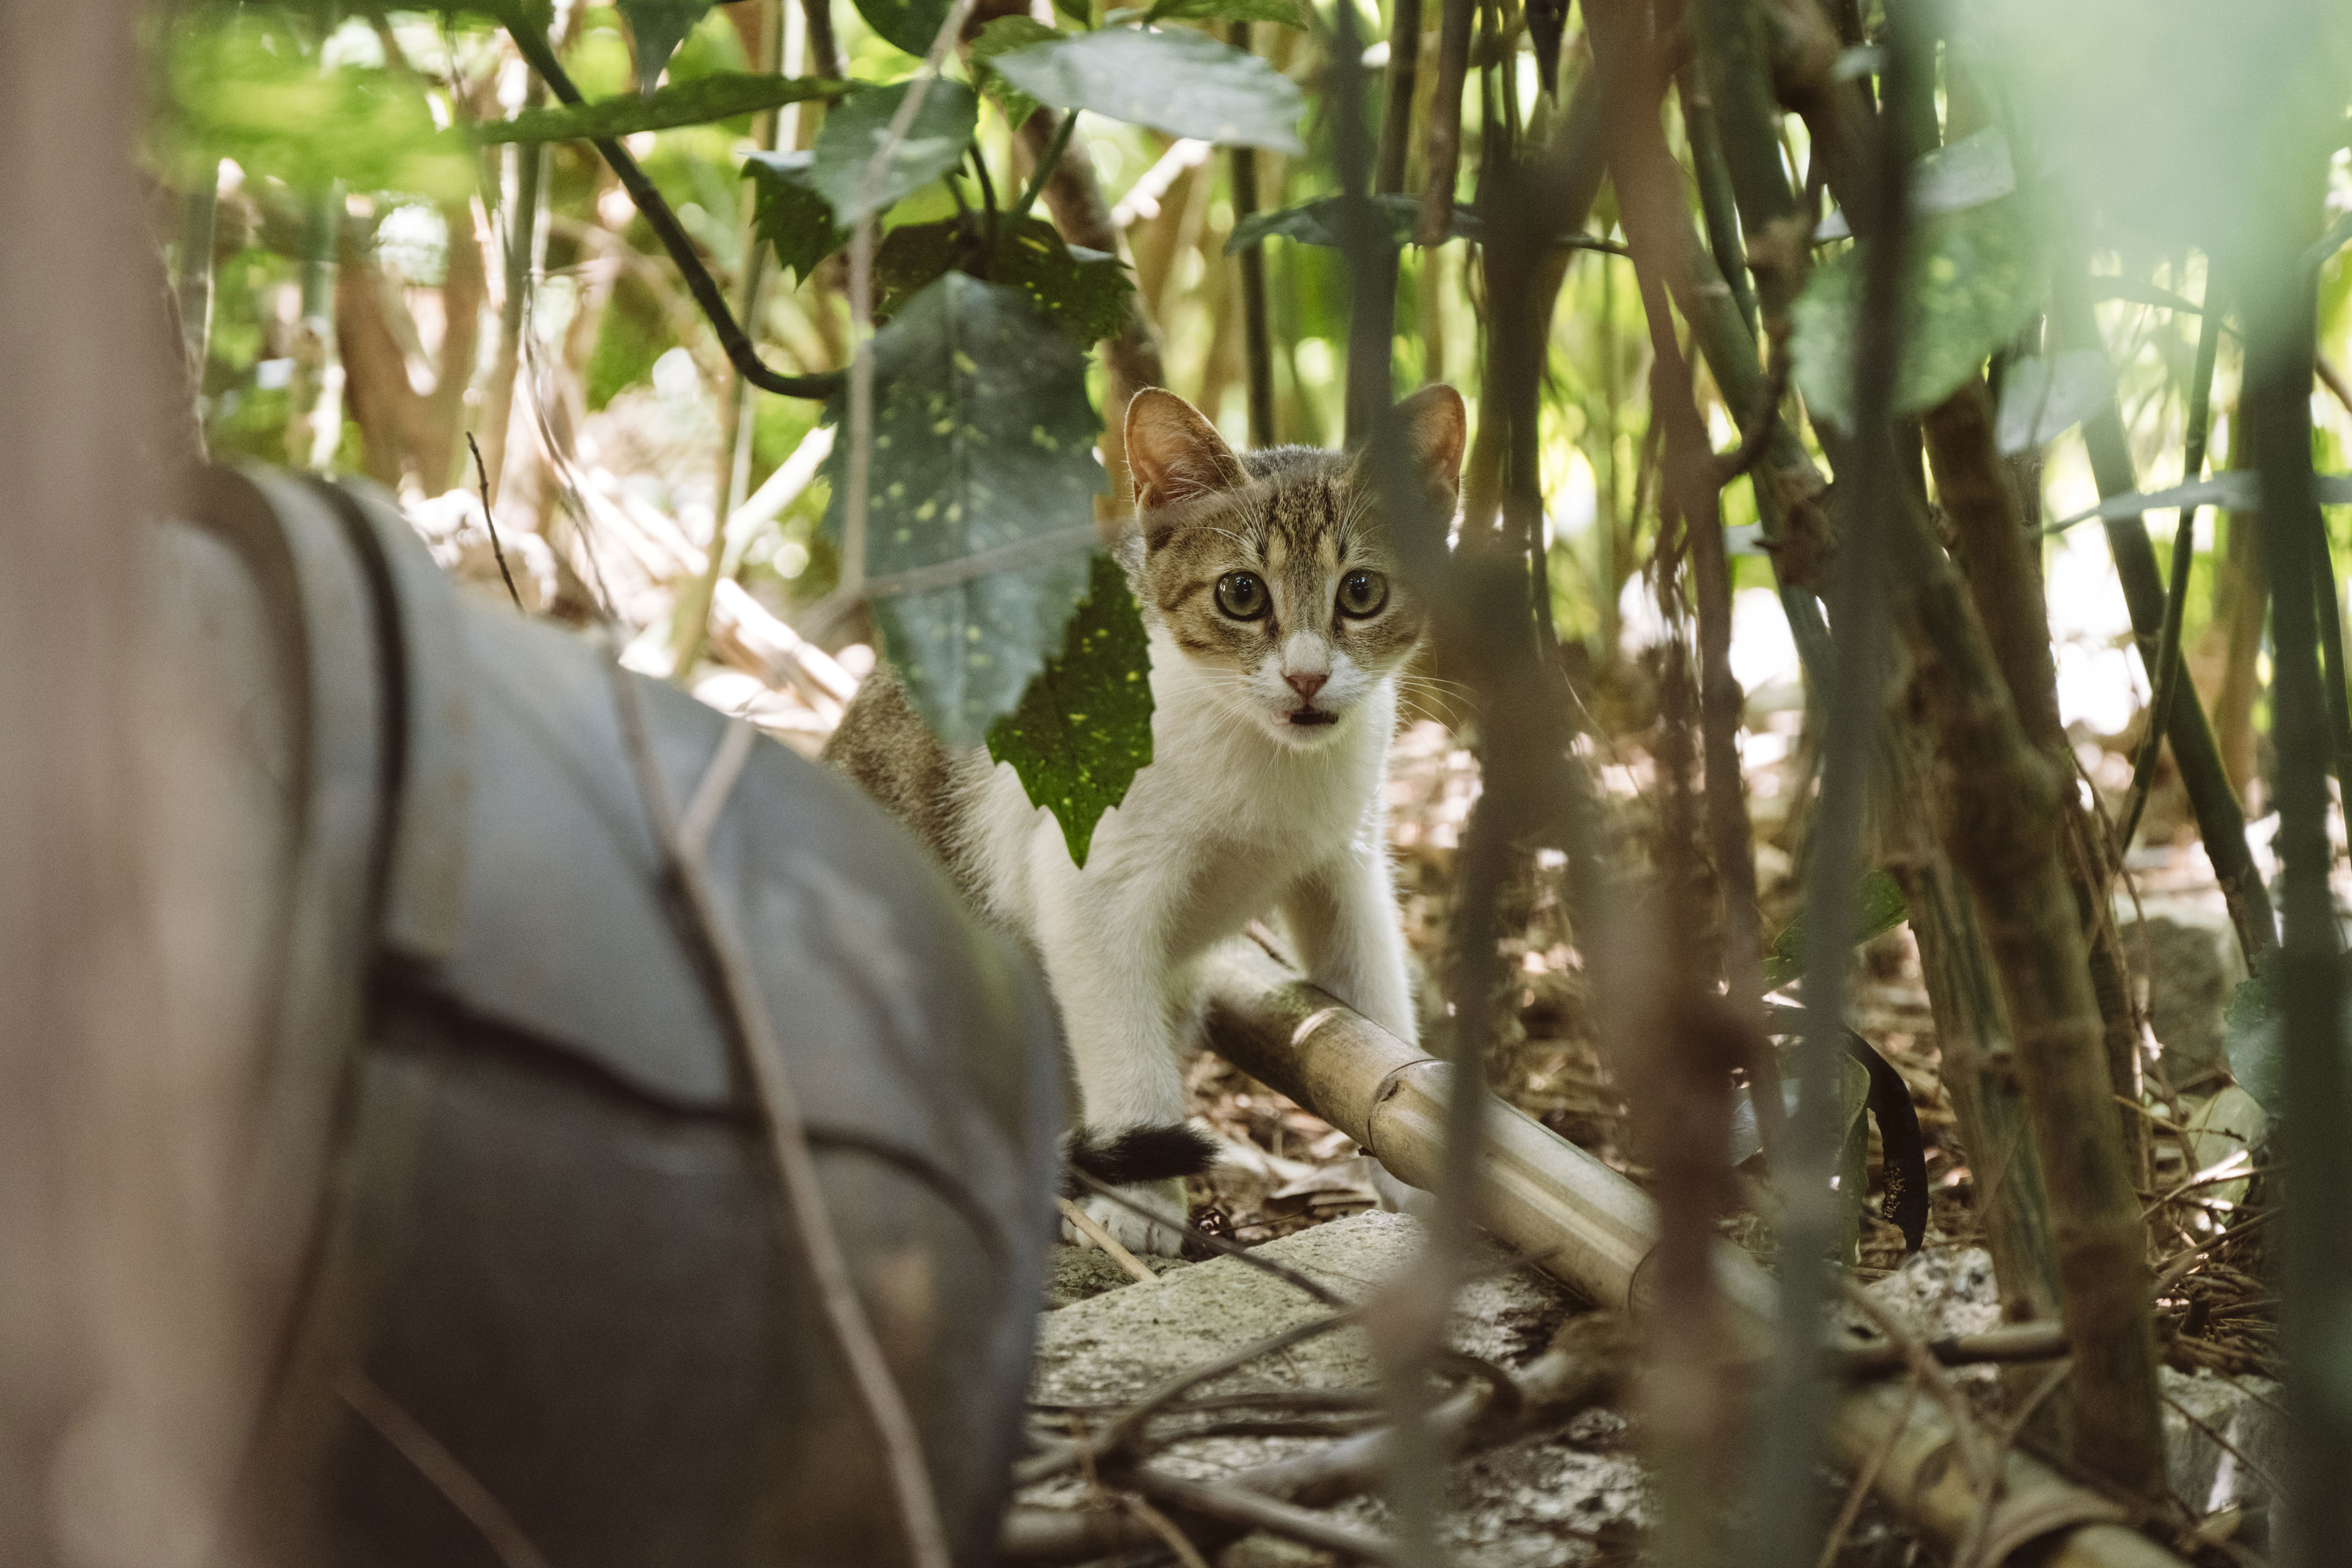 welcome to china’s cat island, where lucky strays wait for a new home